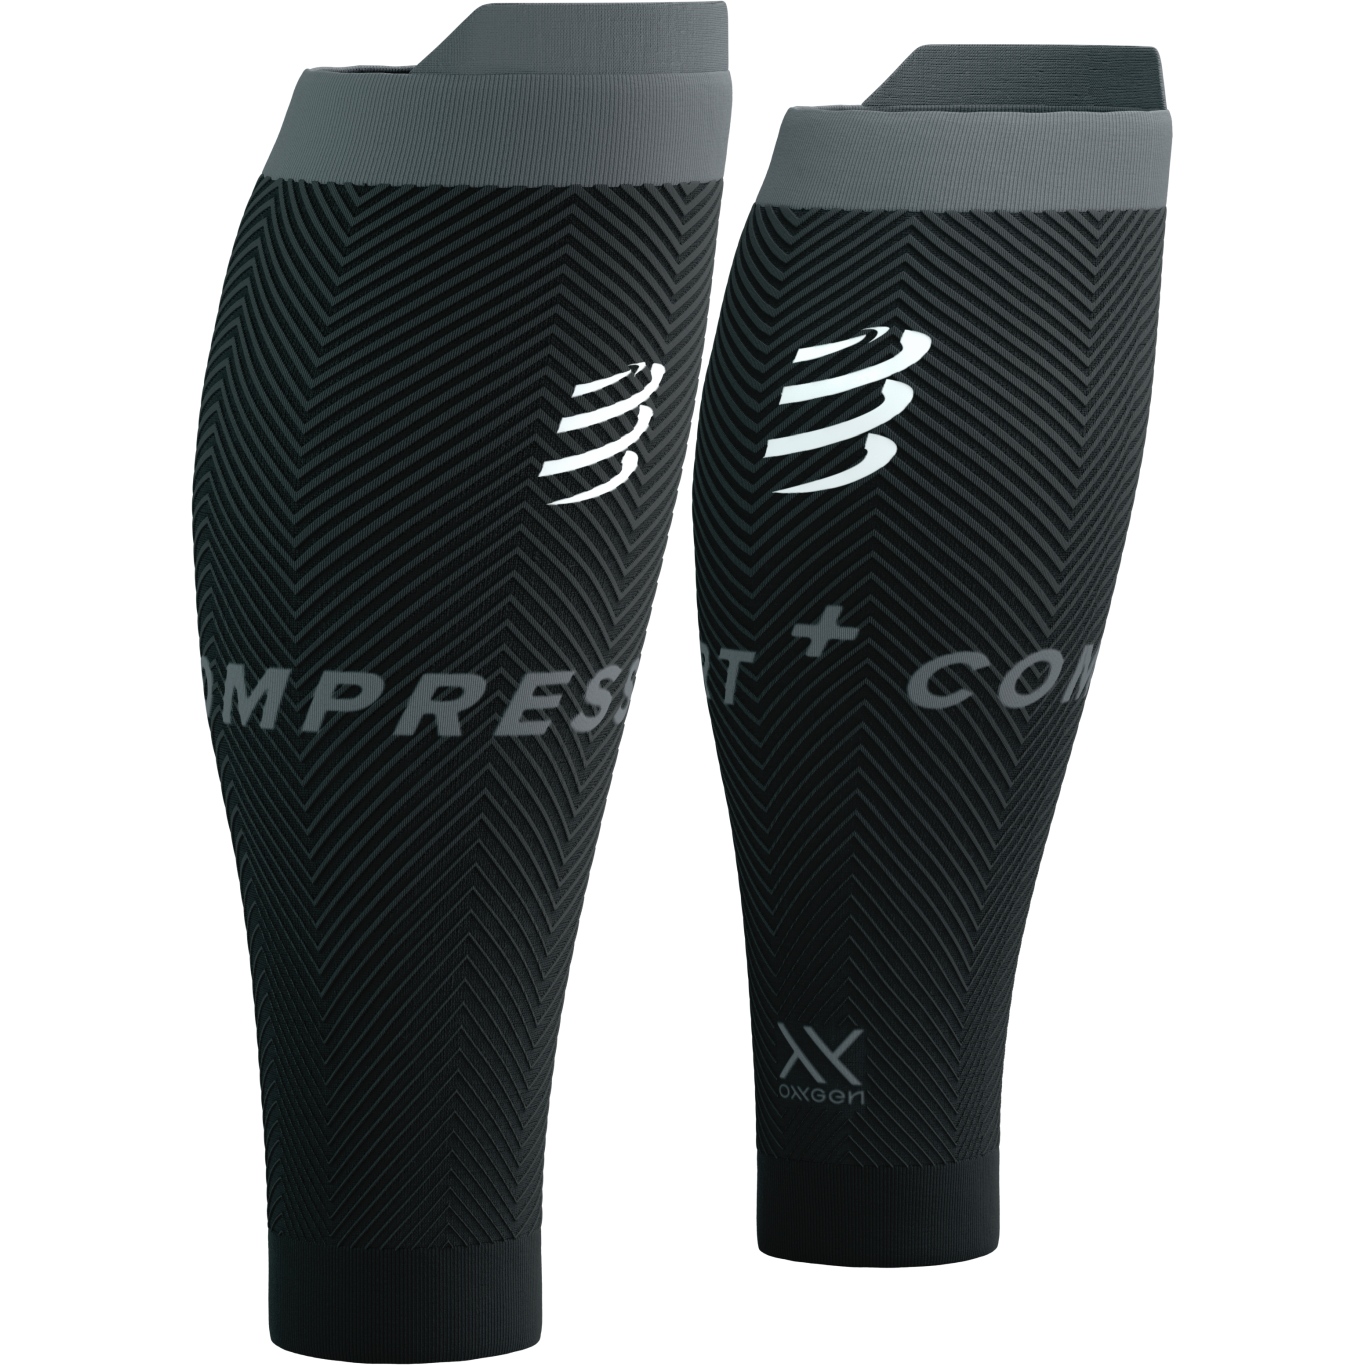 Picture of Compressport R2 Oxygen Compression Calf Sleeves - black/steel grey